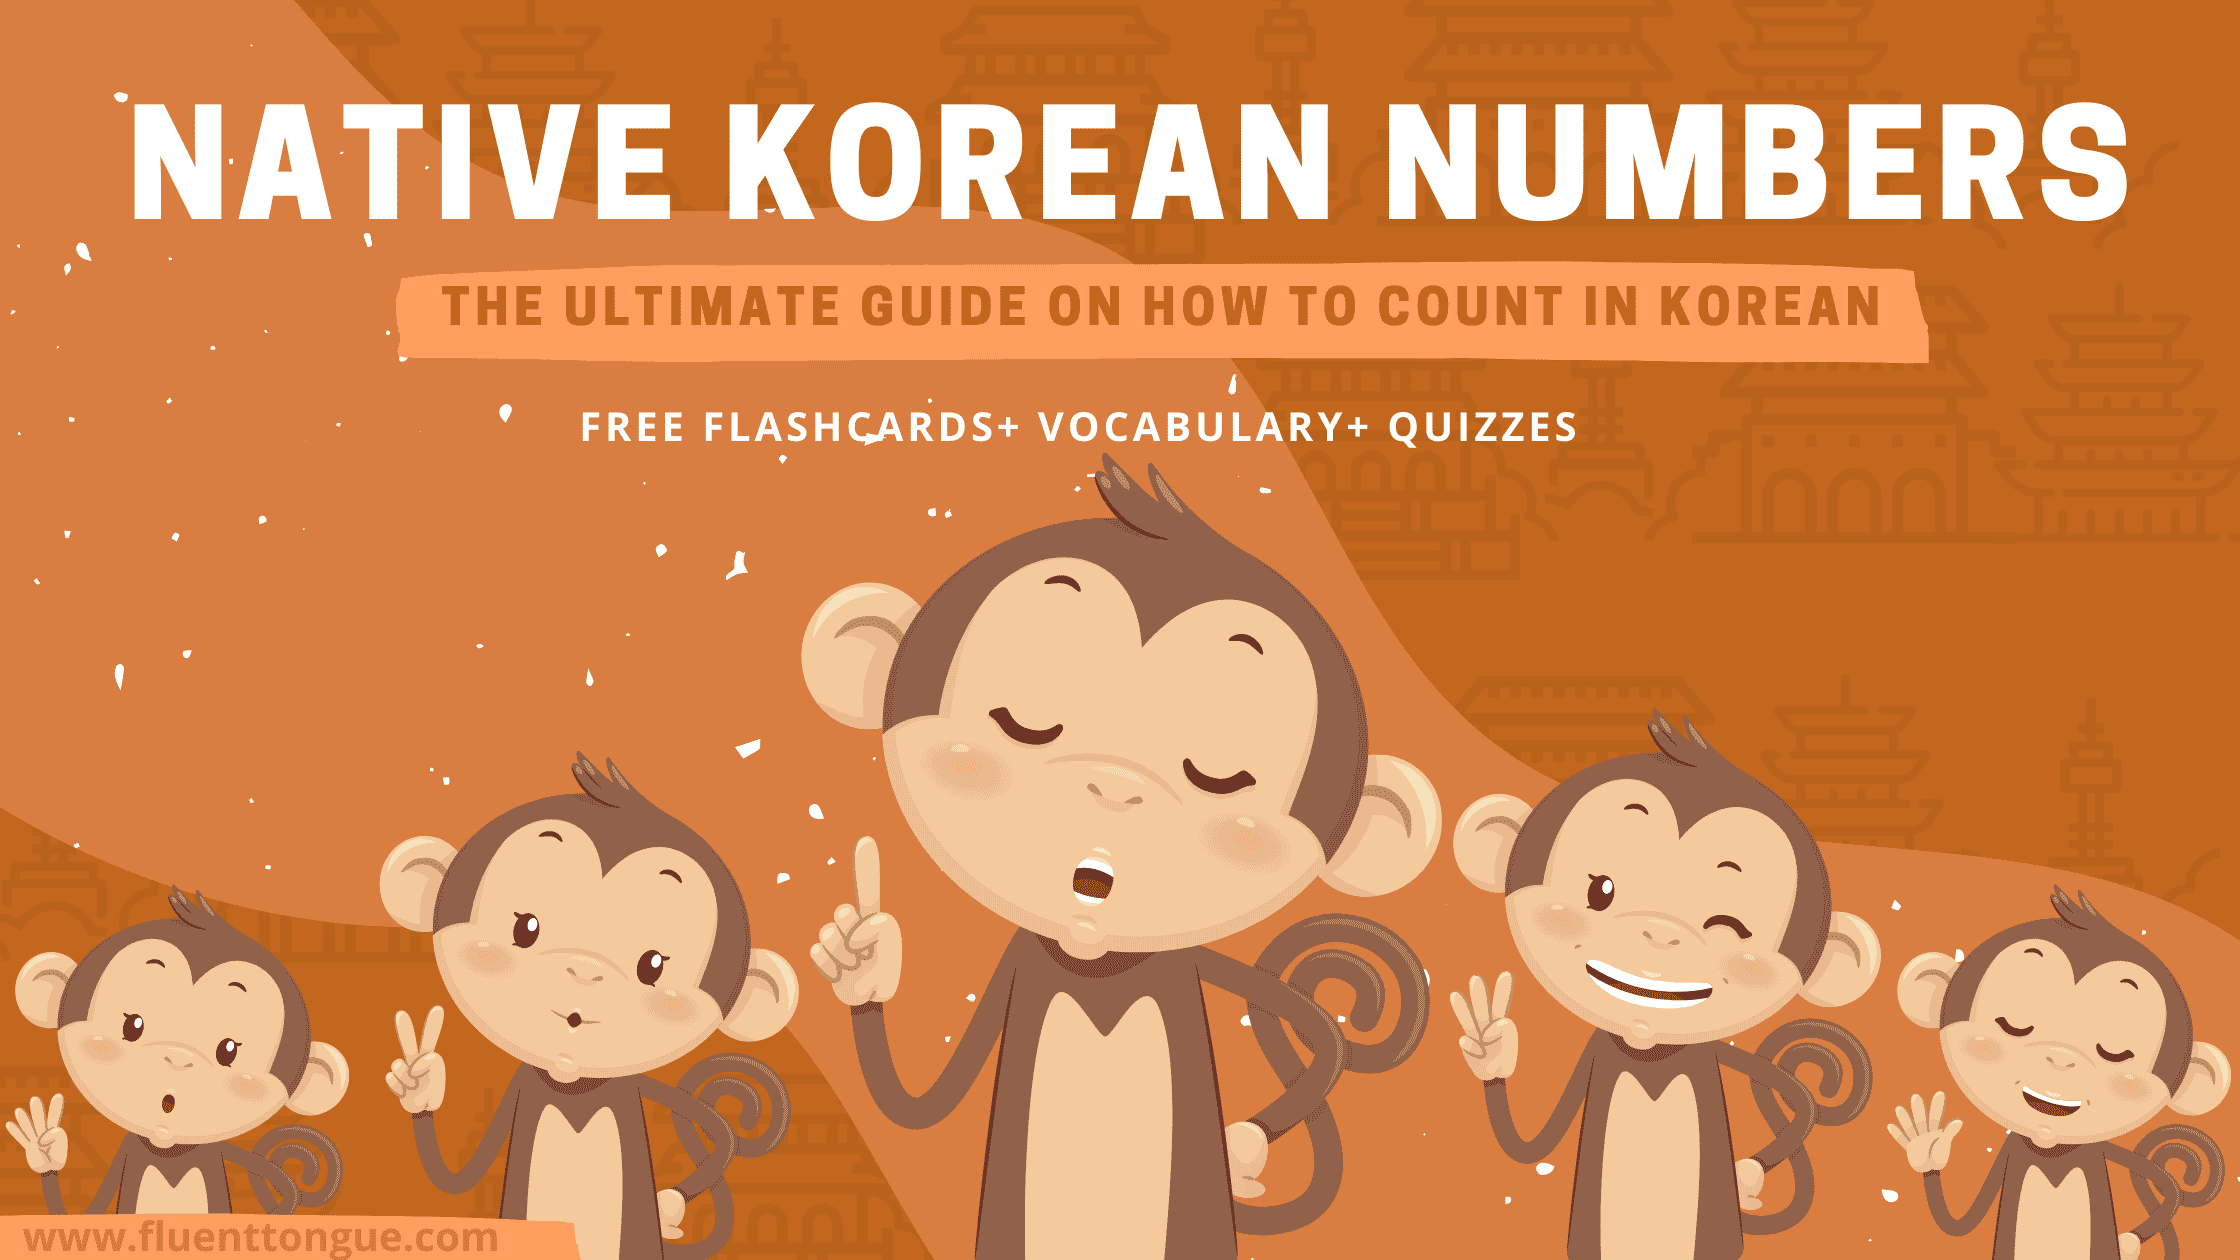 Native Korean Numbers 1-100 made easy|A free crash course